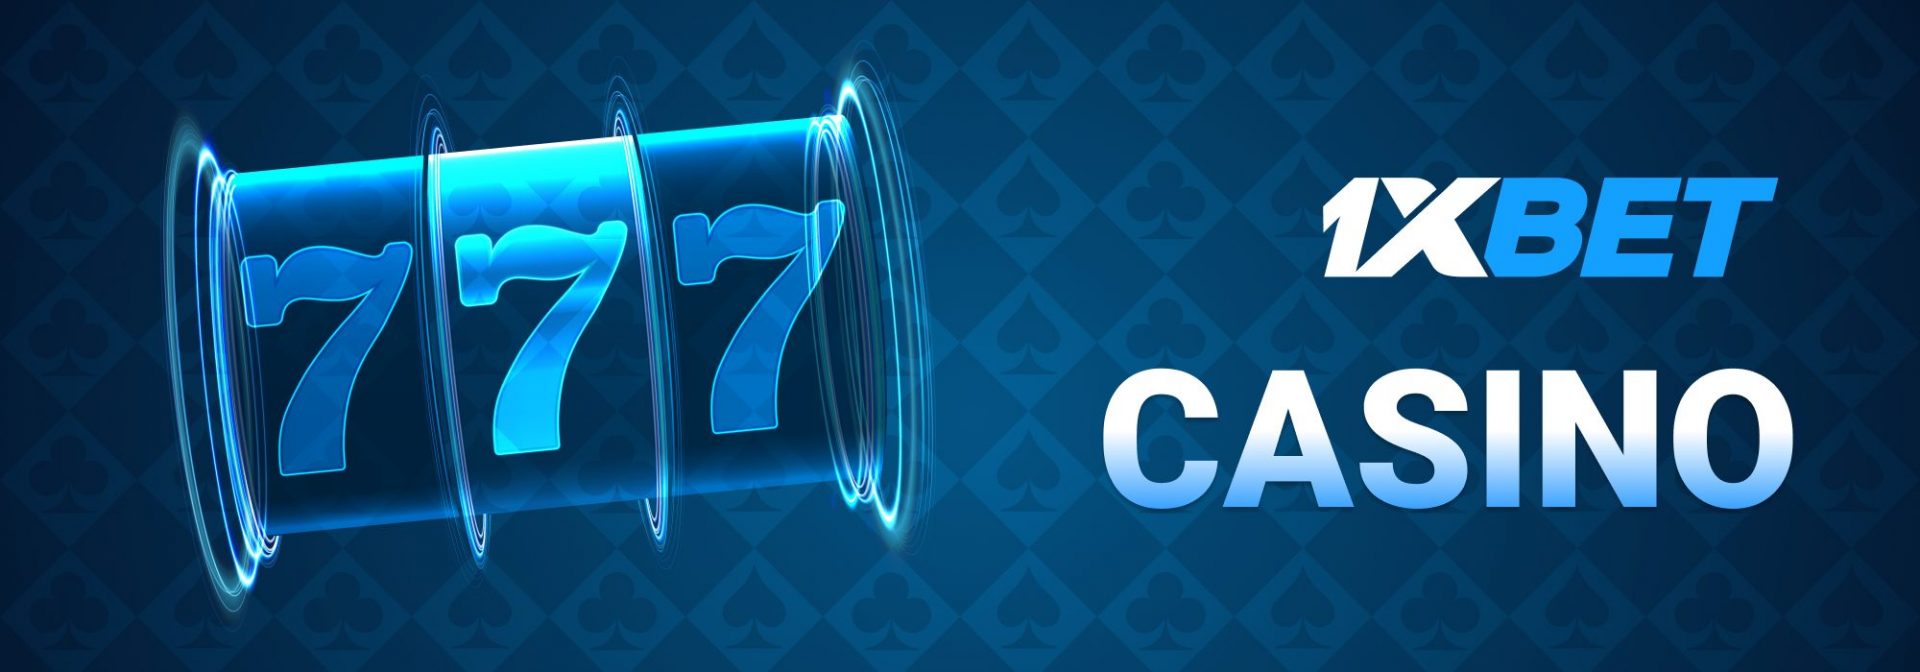 Deposit and withdrawal process in the 1xBet casino